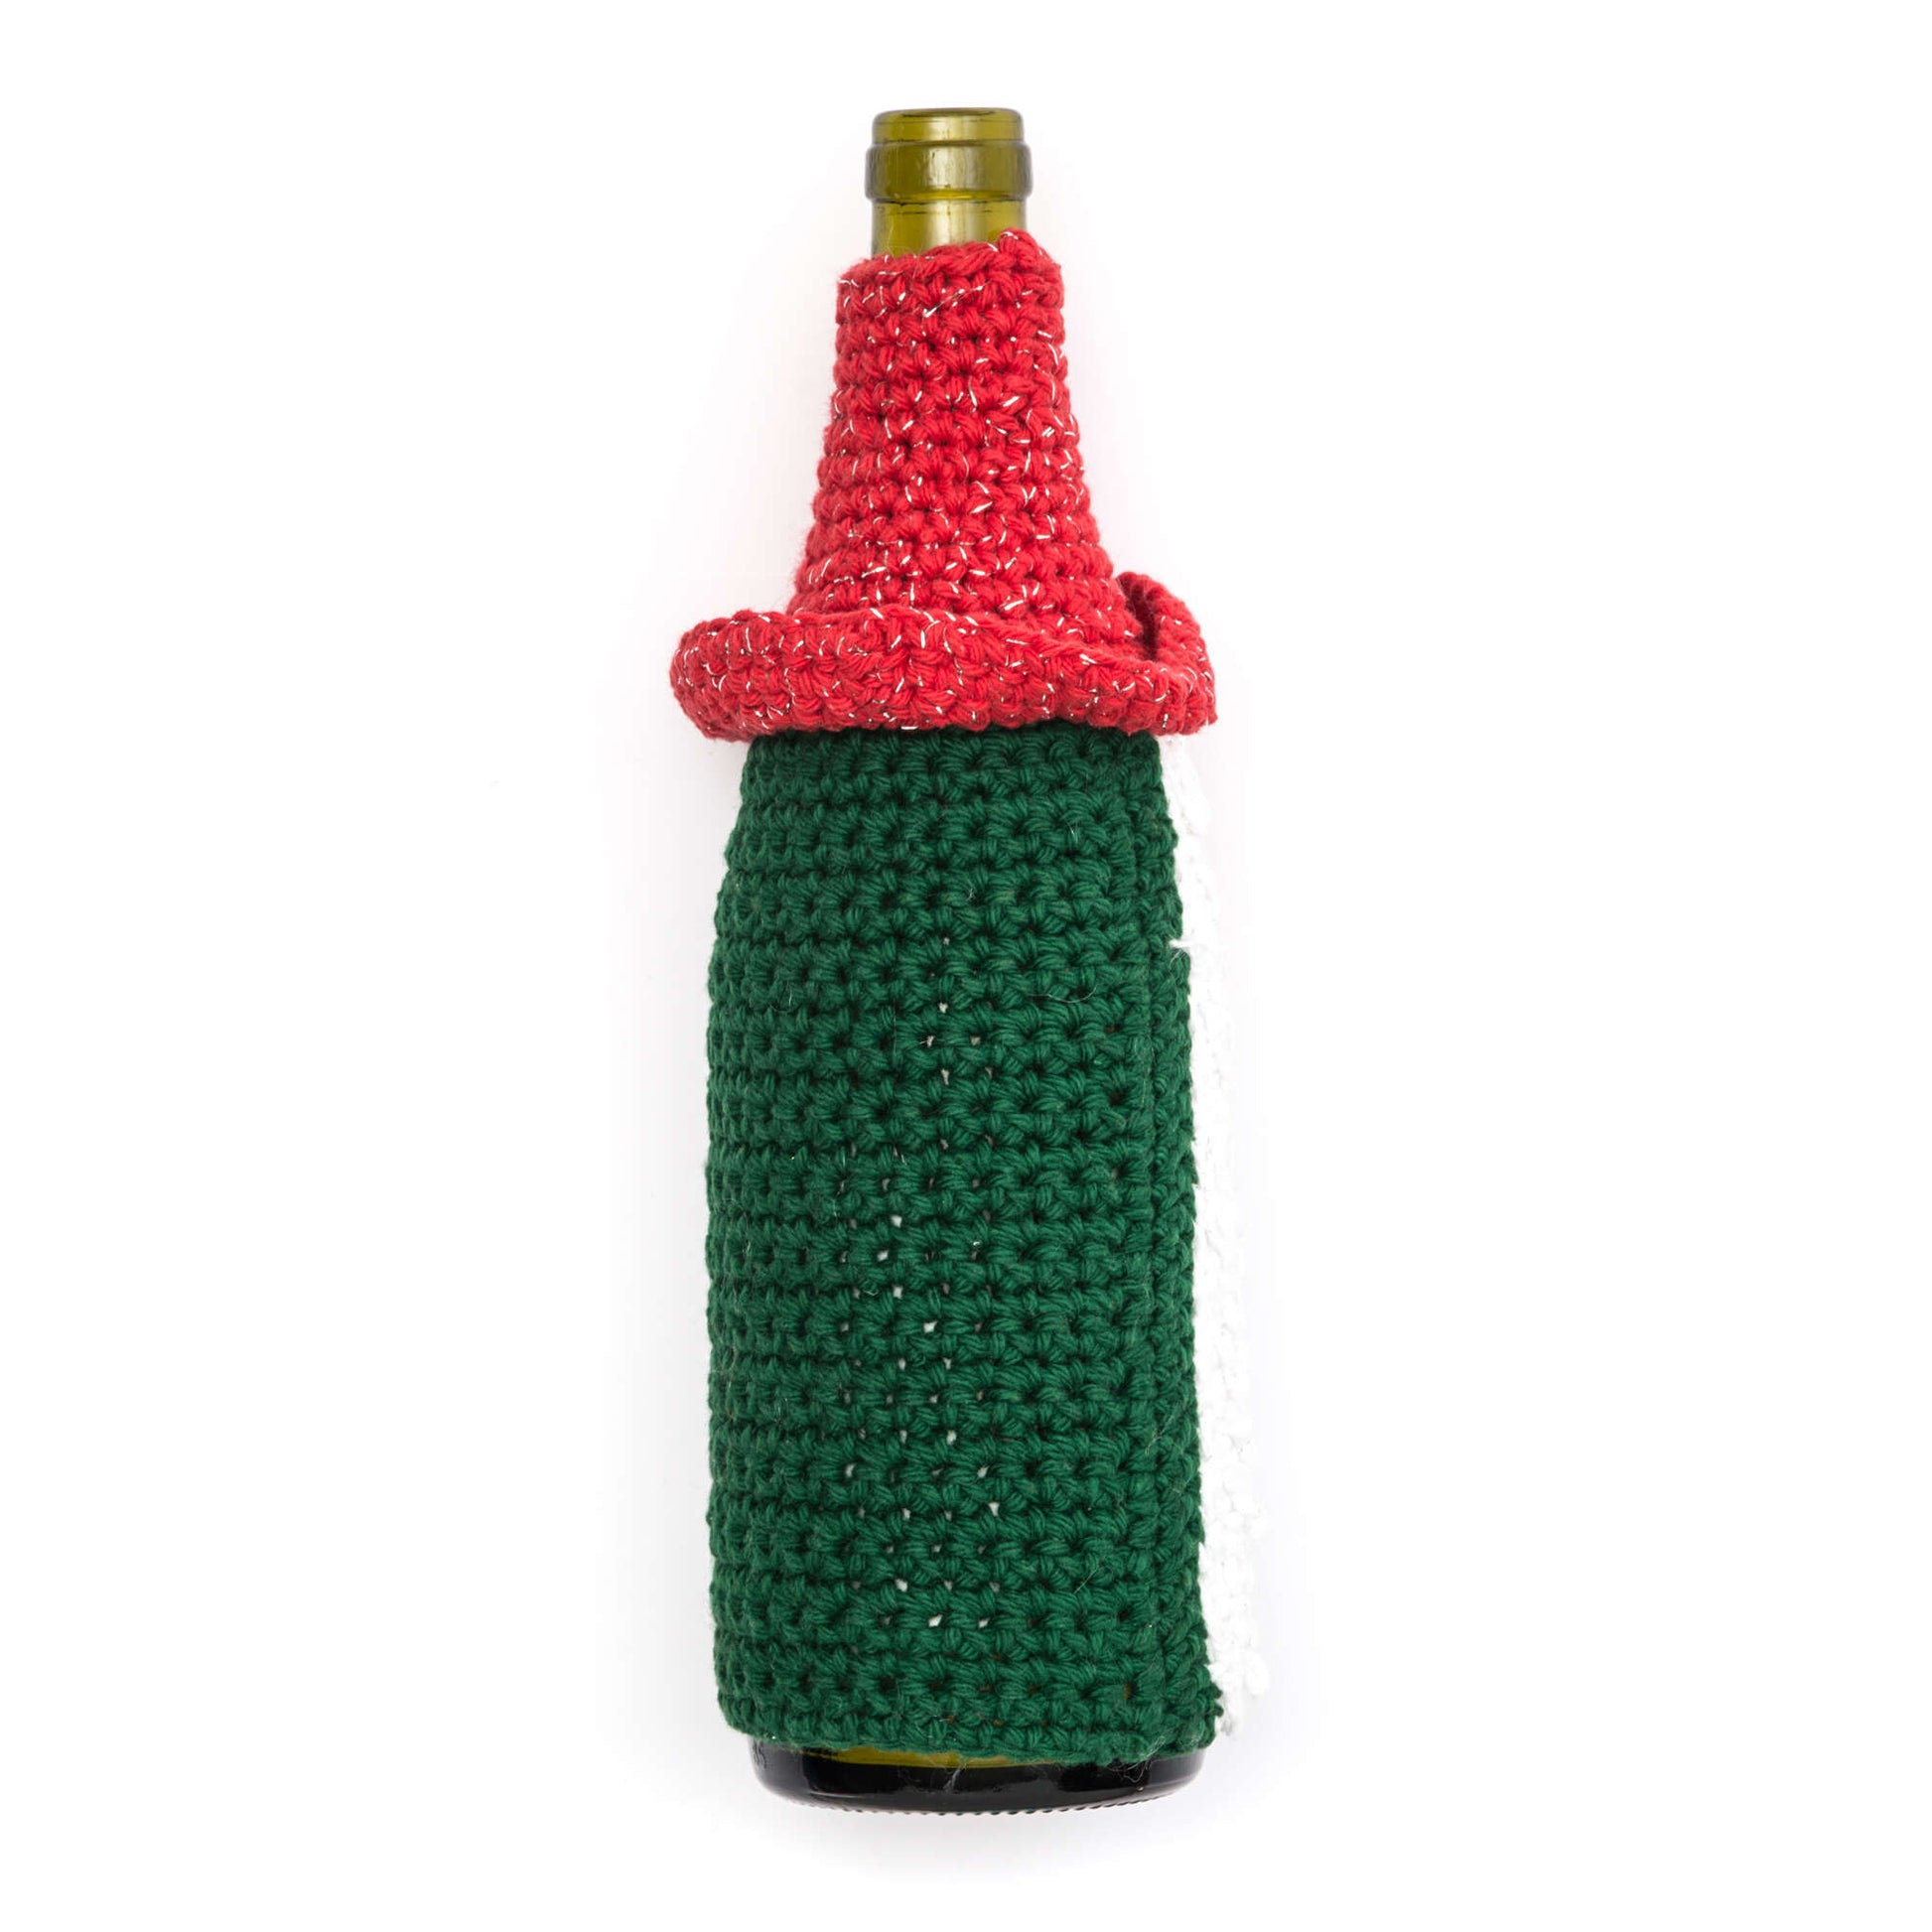 Bernat Gnome For The Holidays Wine Bottle Cozy Crochet Holiday made in Bernat Handicrafter Cotton yarn